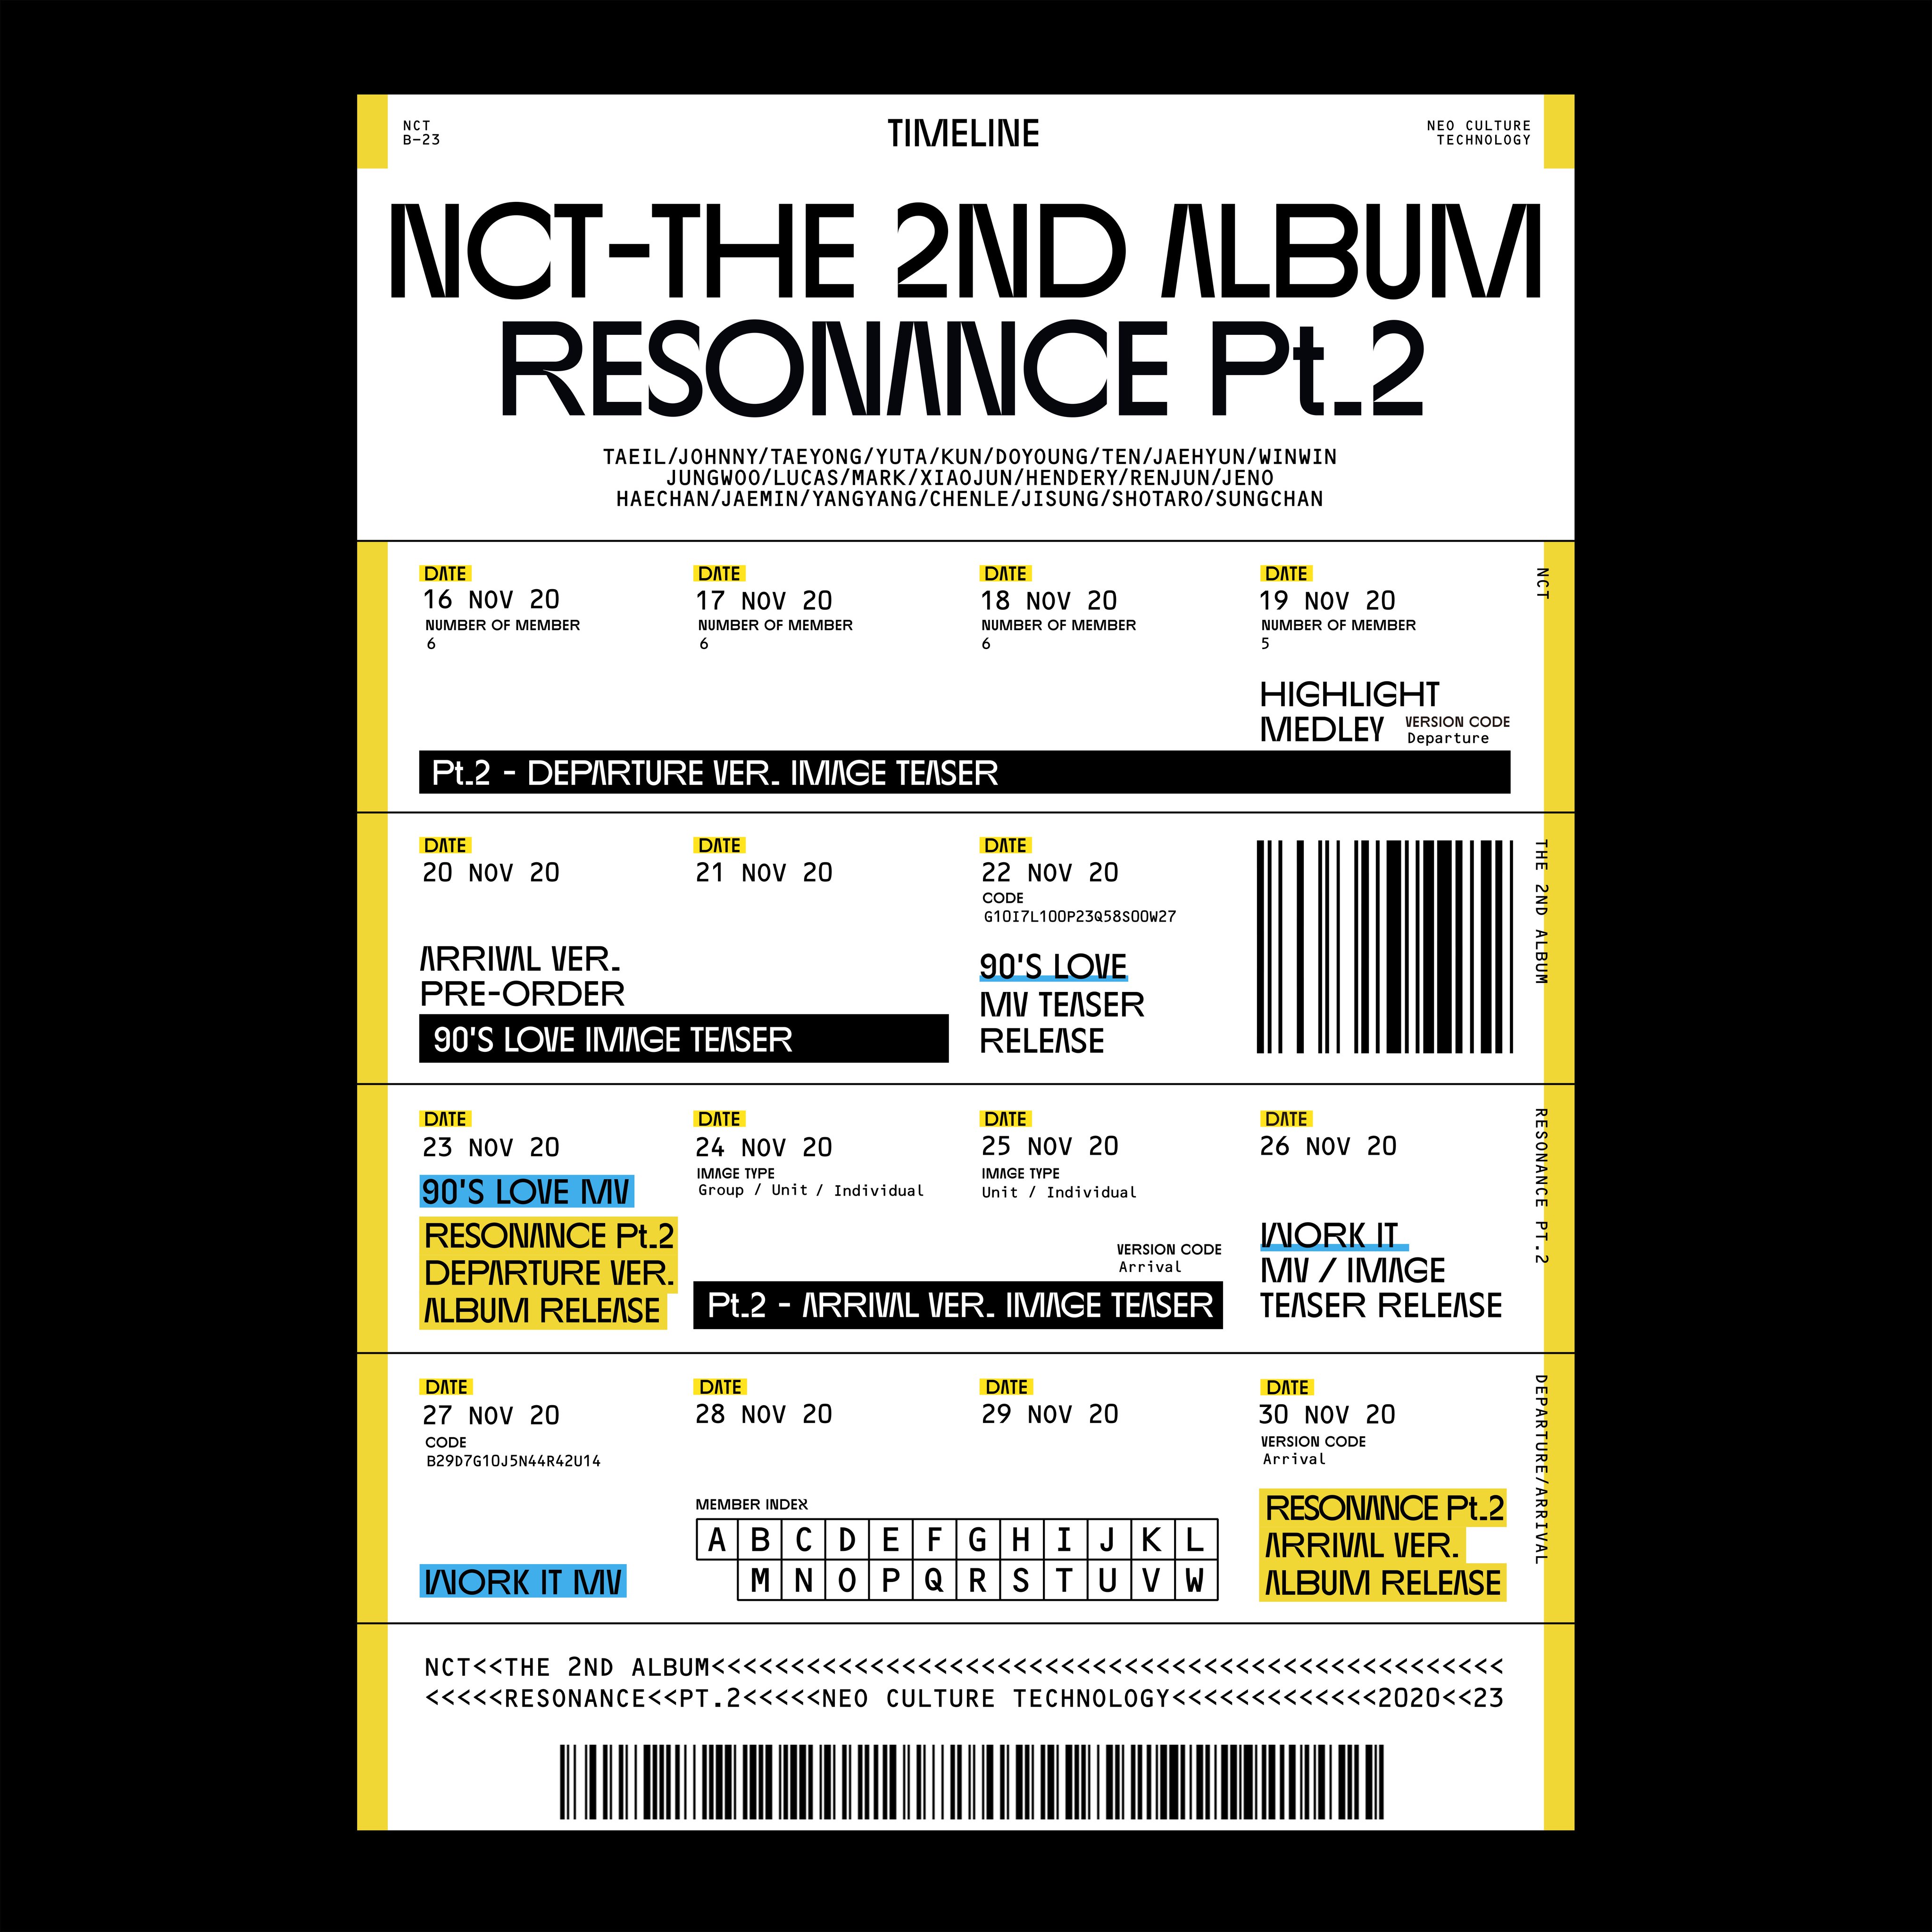 nct-unveils-detailed-schedule-and-tracklist-for-upcoming-comeback-with-resonance-pt2-3